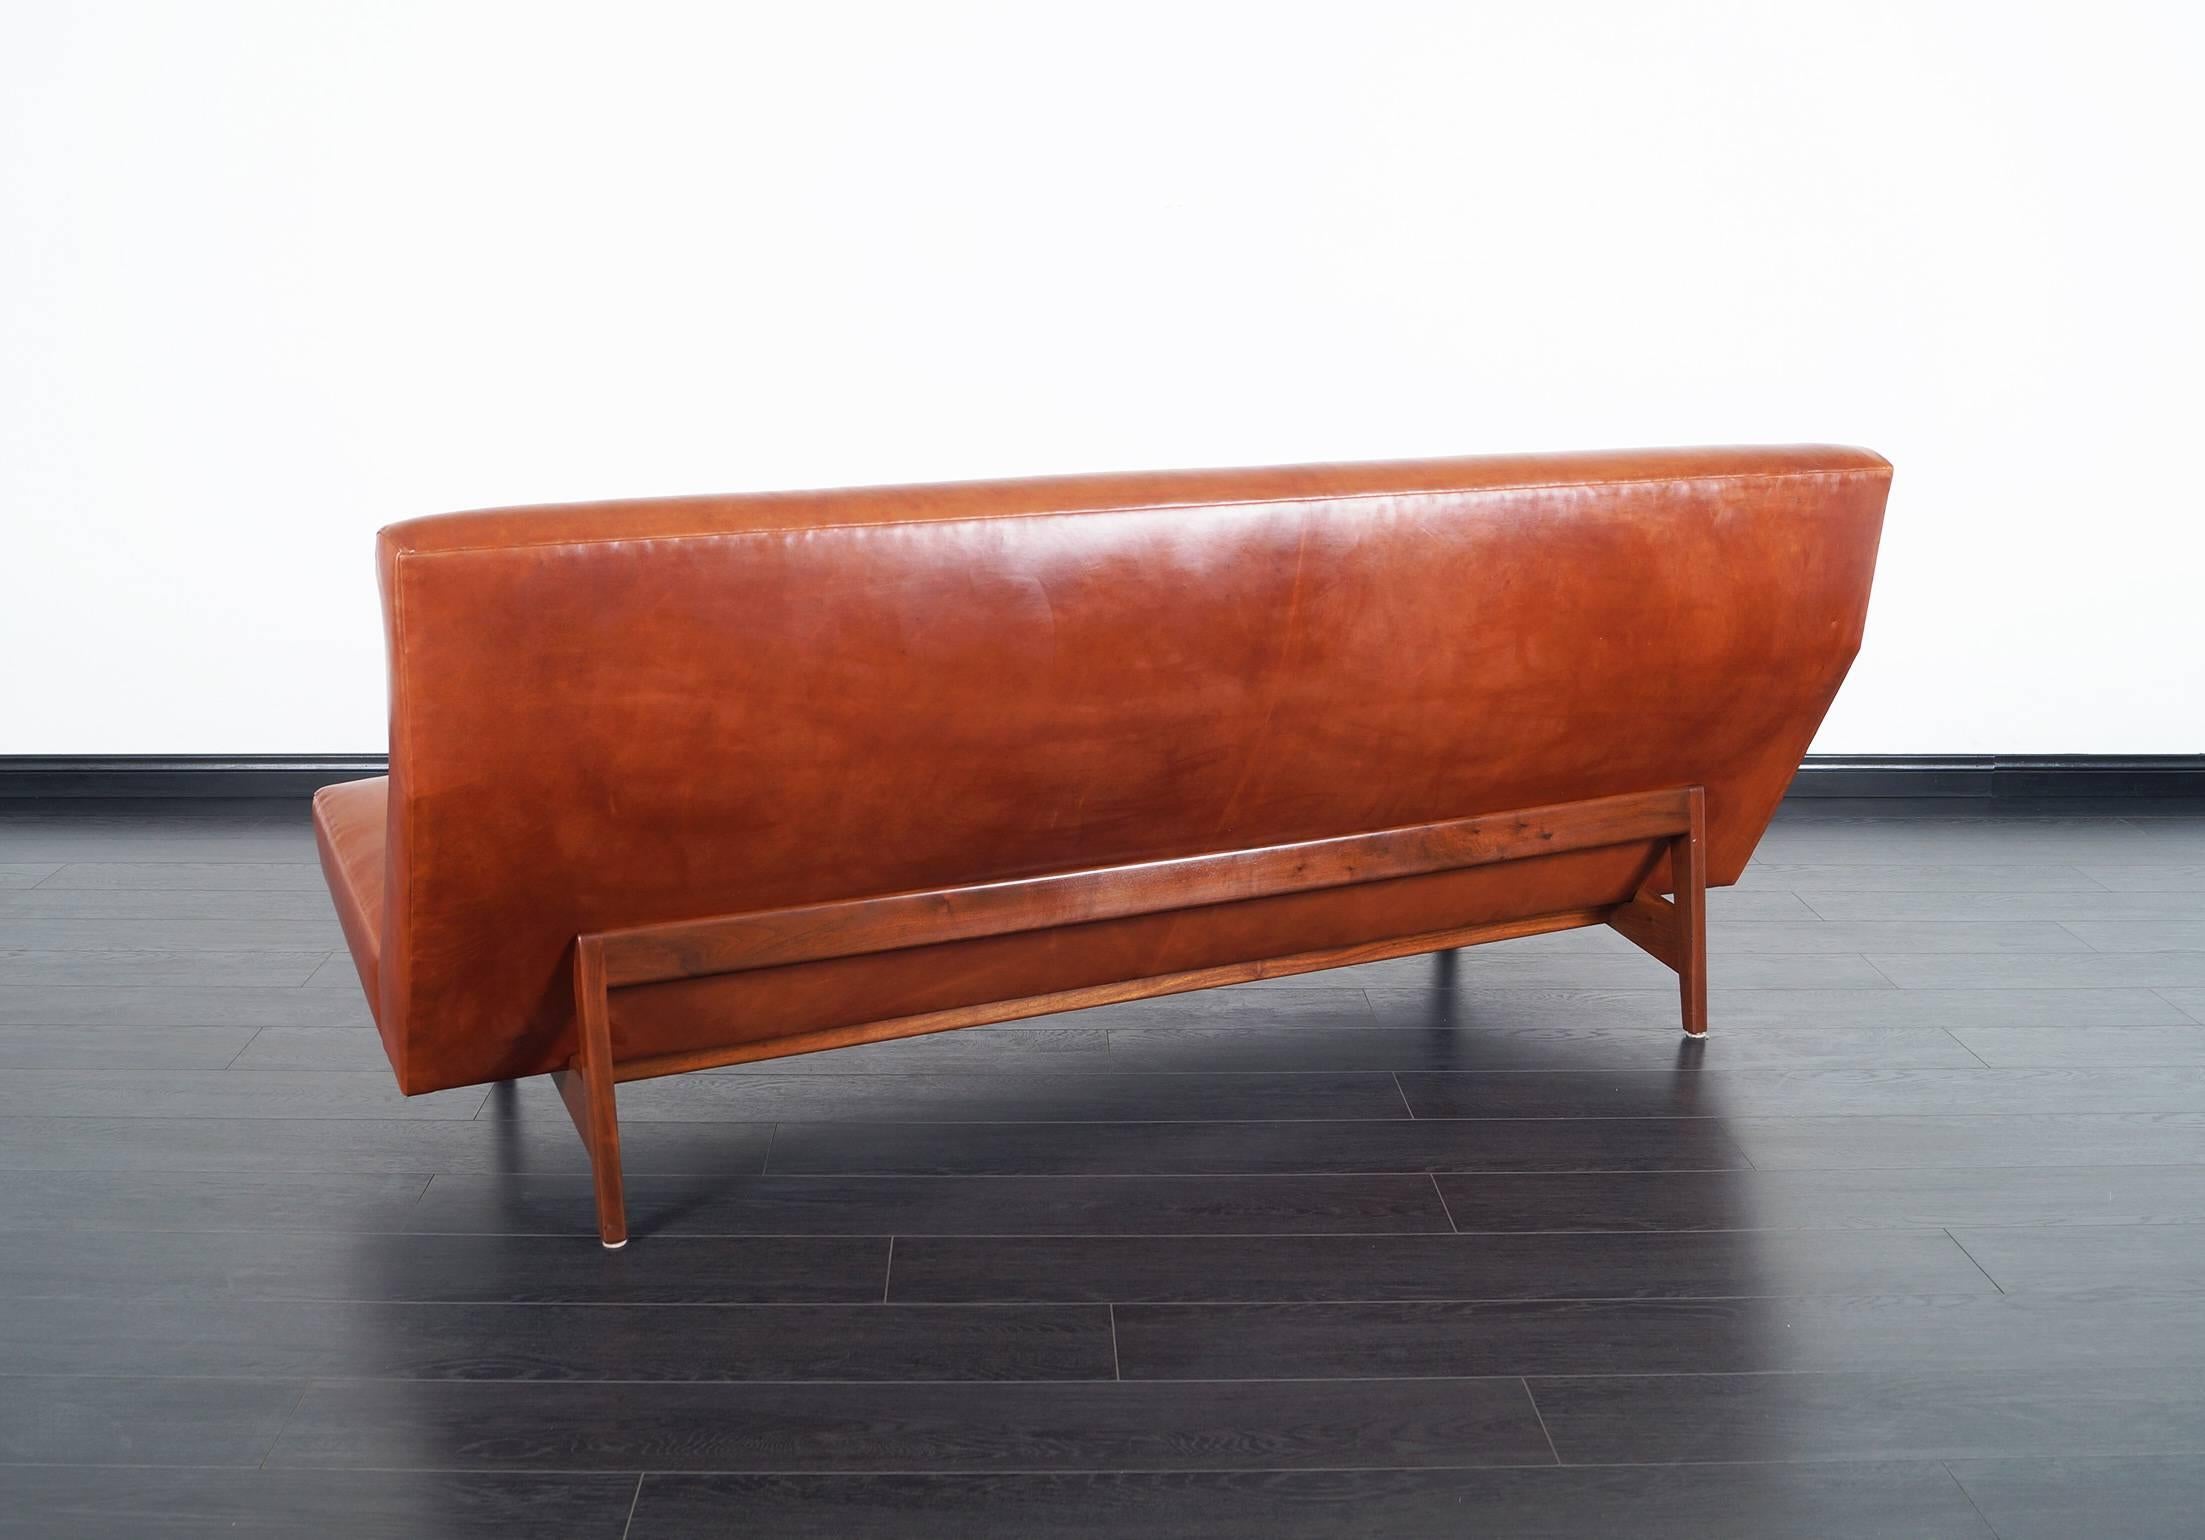 Mid-20th Century Vintage Leather and Walnut Sofa by Jens Risom